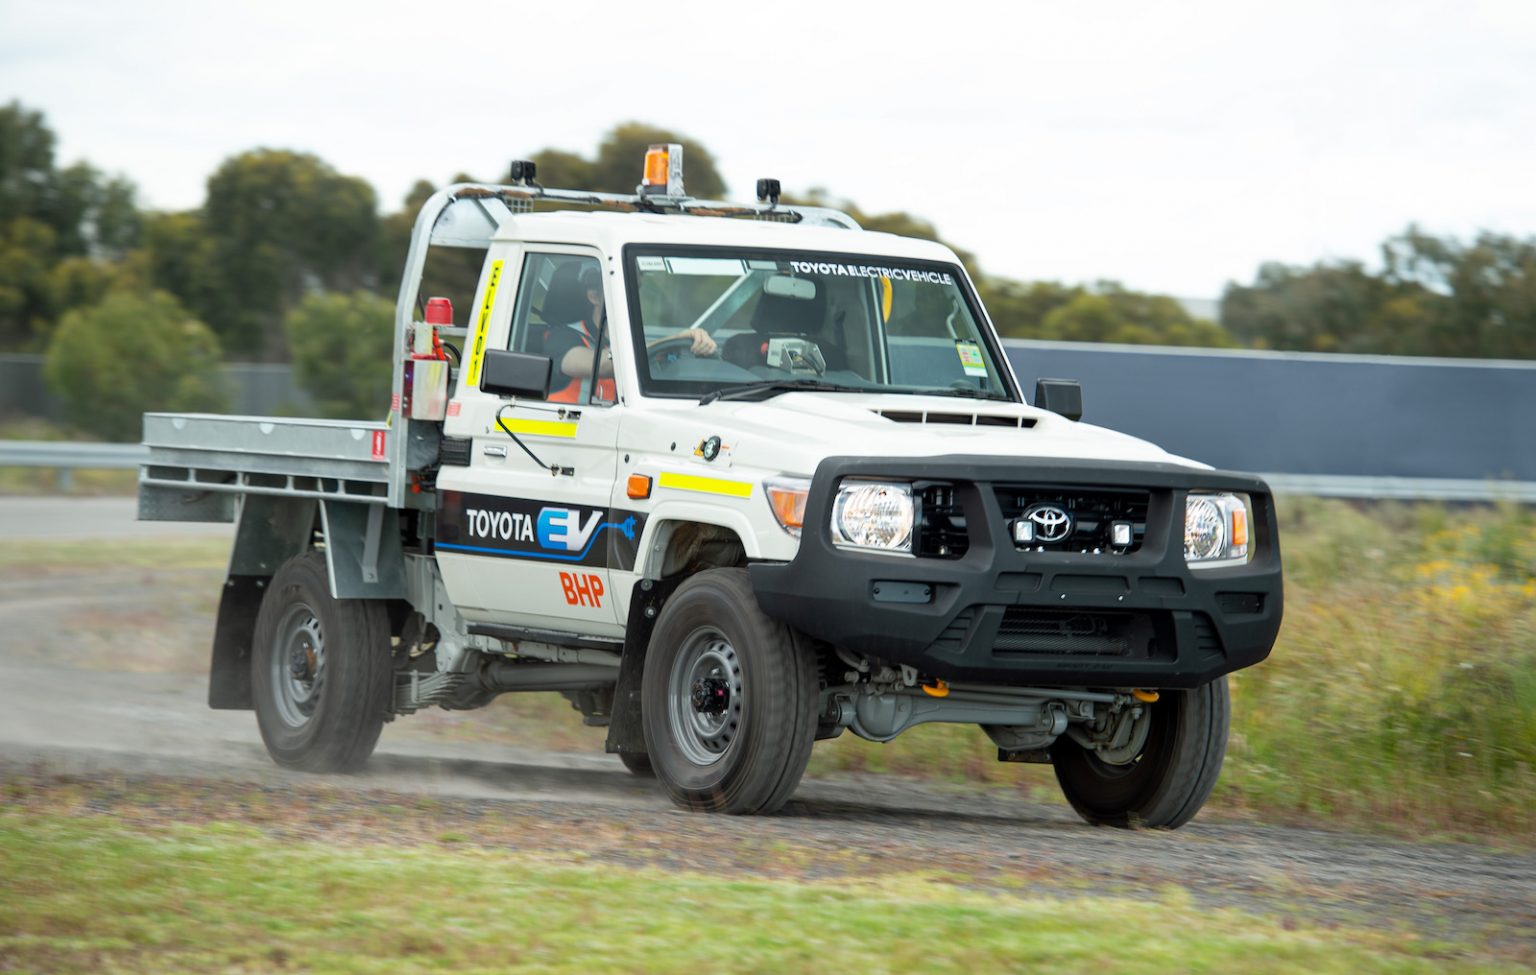 Electric Toyota LandCruiser 70 Series built for BHP mining